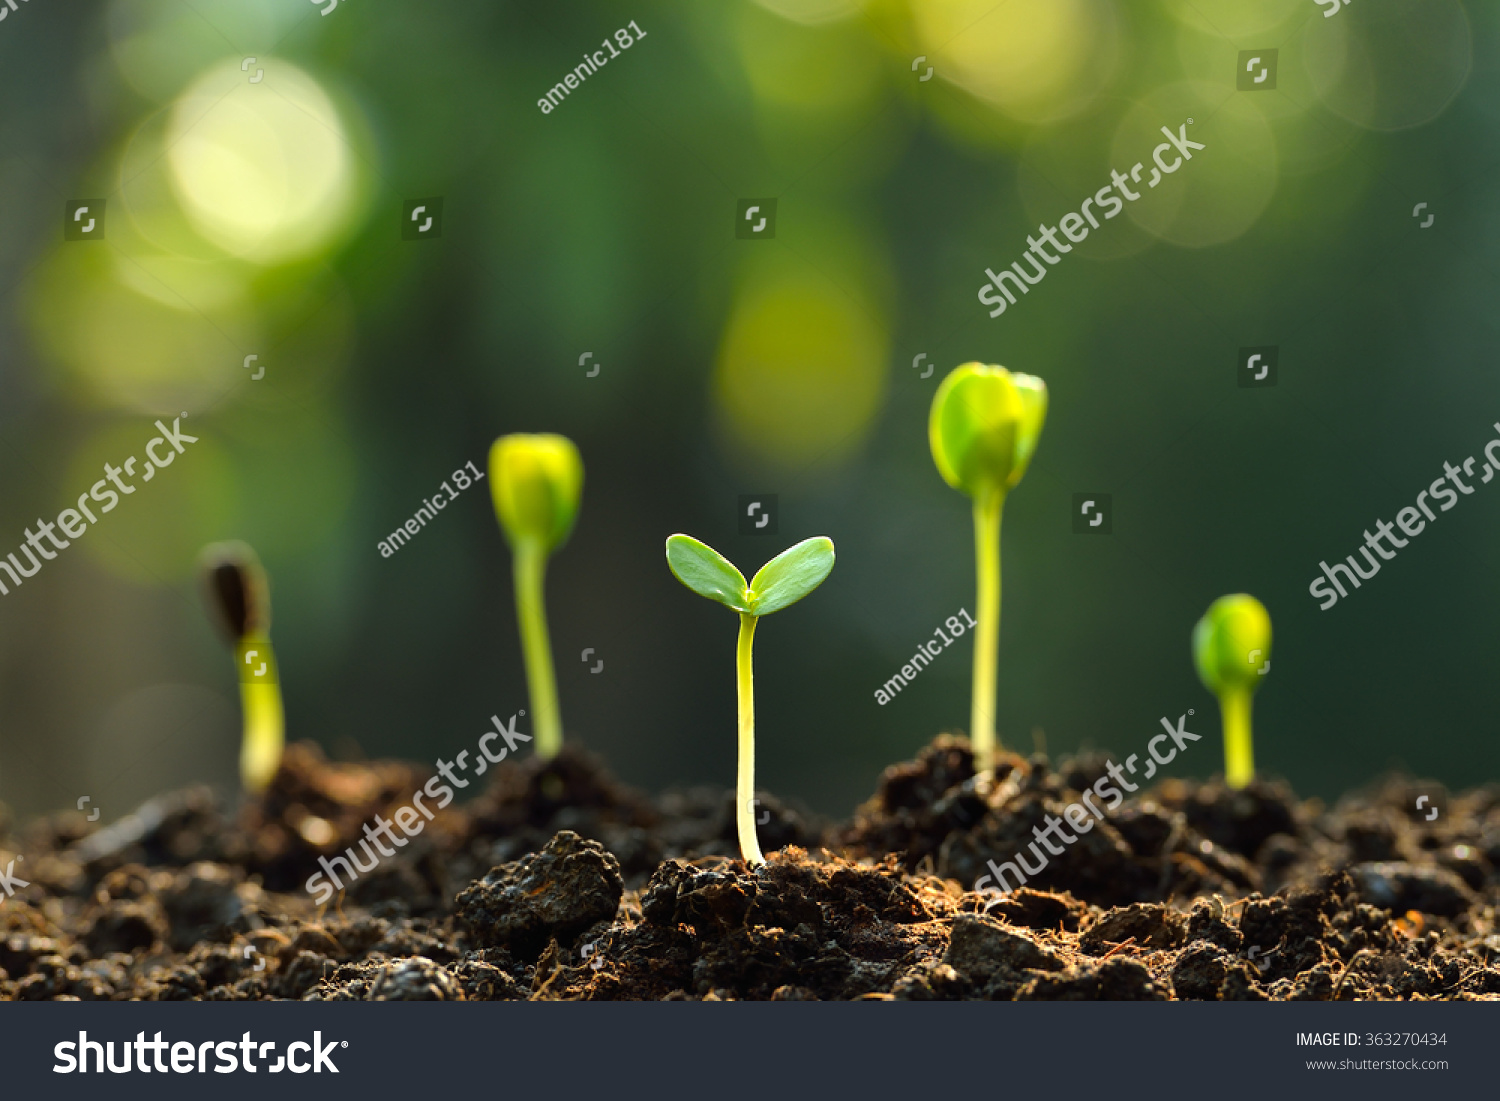 Group of green sprouts growing out from soil
 #363270434